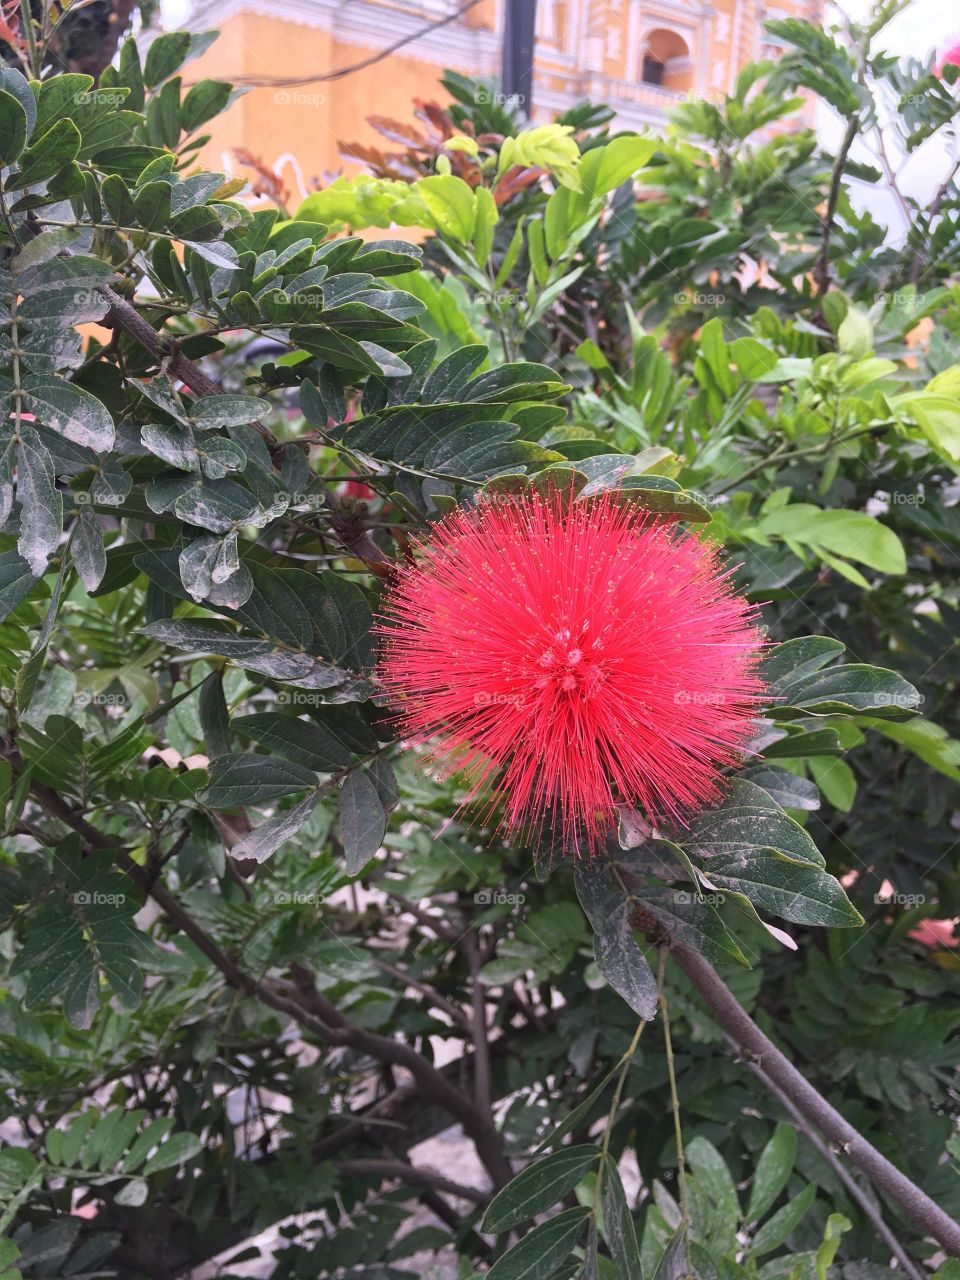 Don’t know what kind of flower but it’s super soft yet looks super spikey